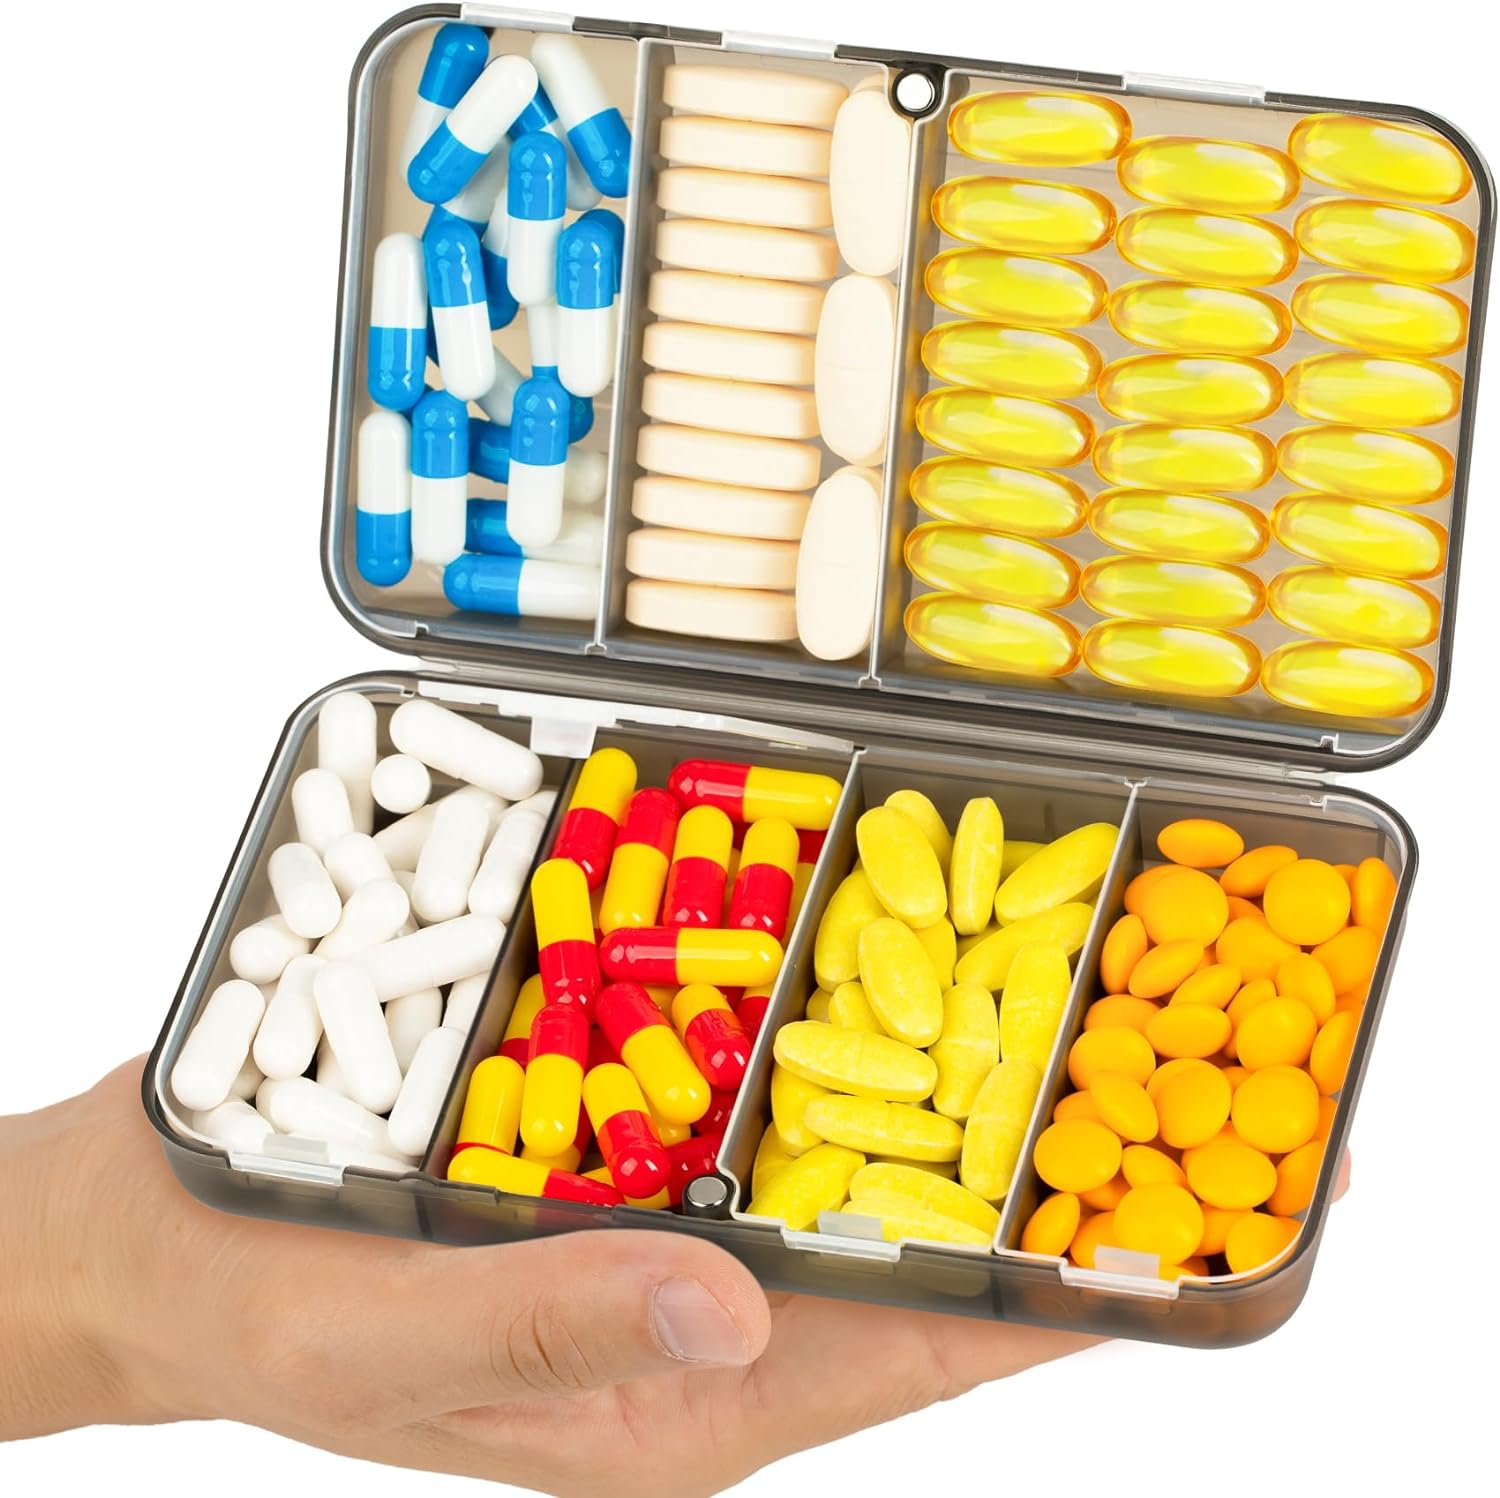 Easy to organize. Lightweight, keeps meds tidy and dry